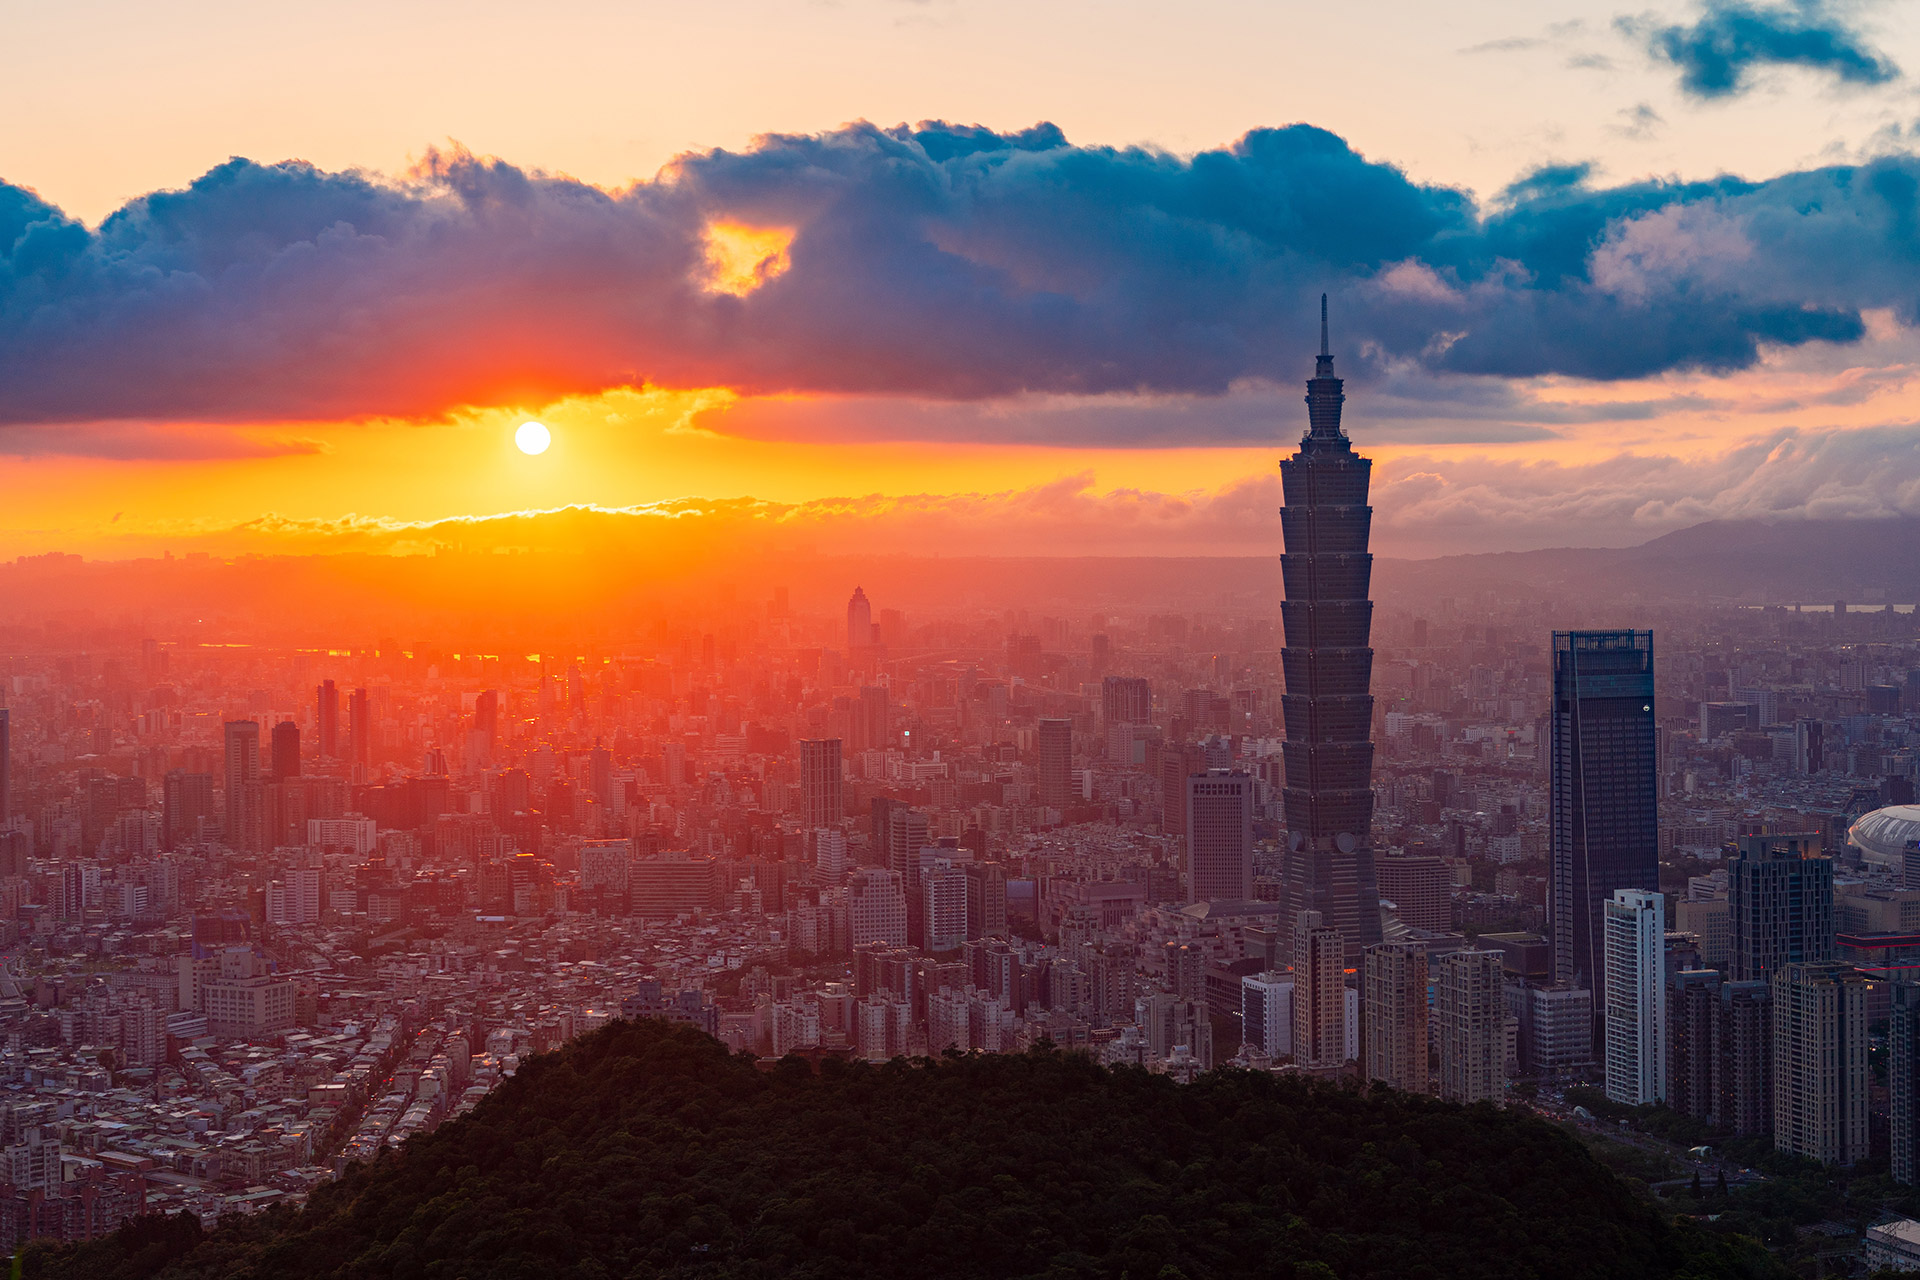 Taiwan by Timo Volz on Unsplash